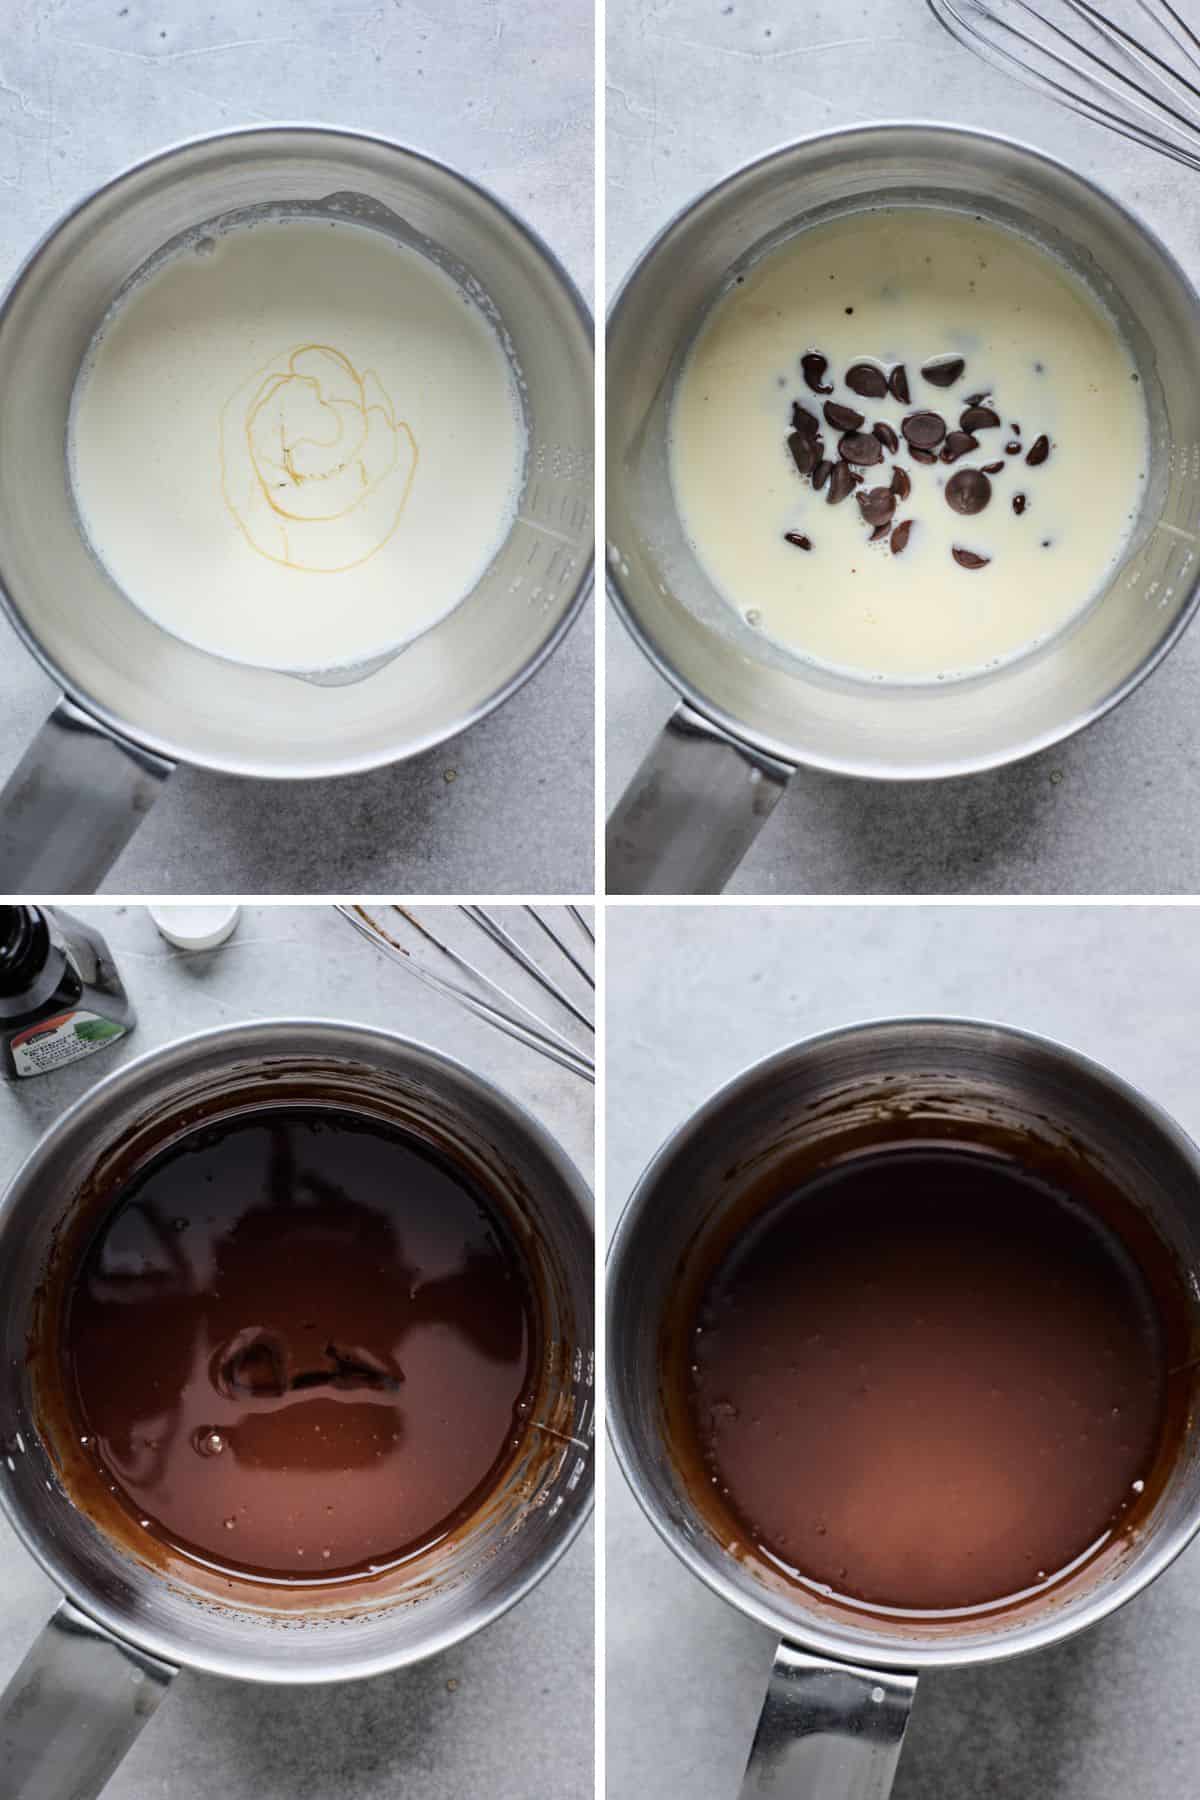 A collage of images showing the steps for making the peppermint ganache.